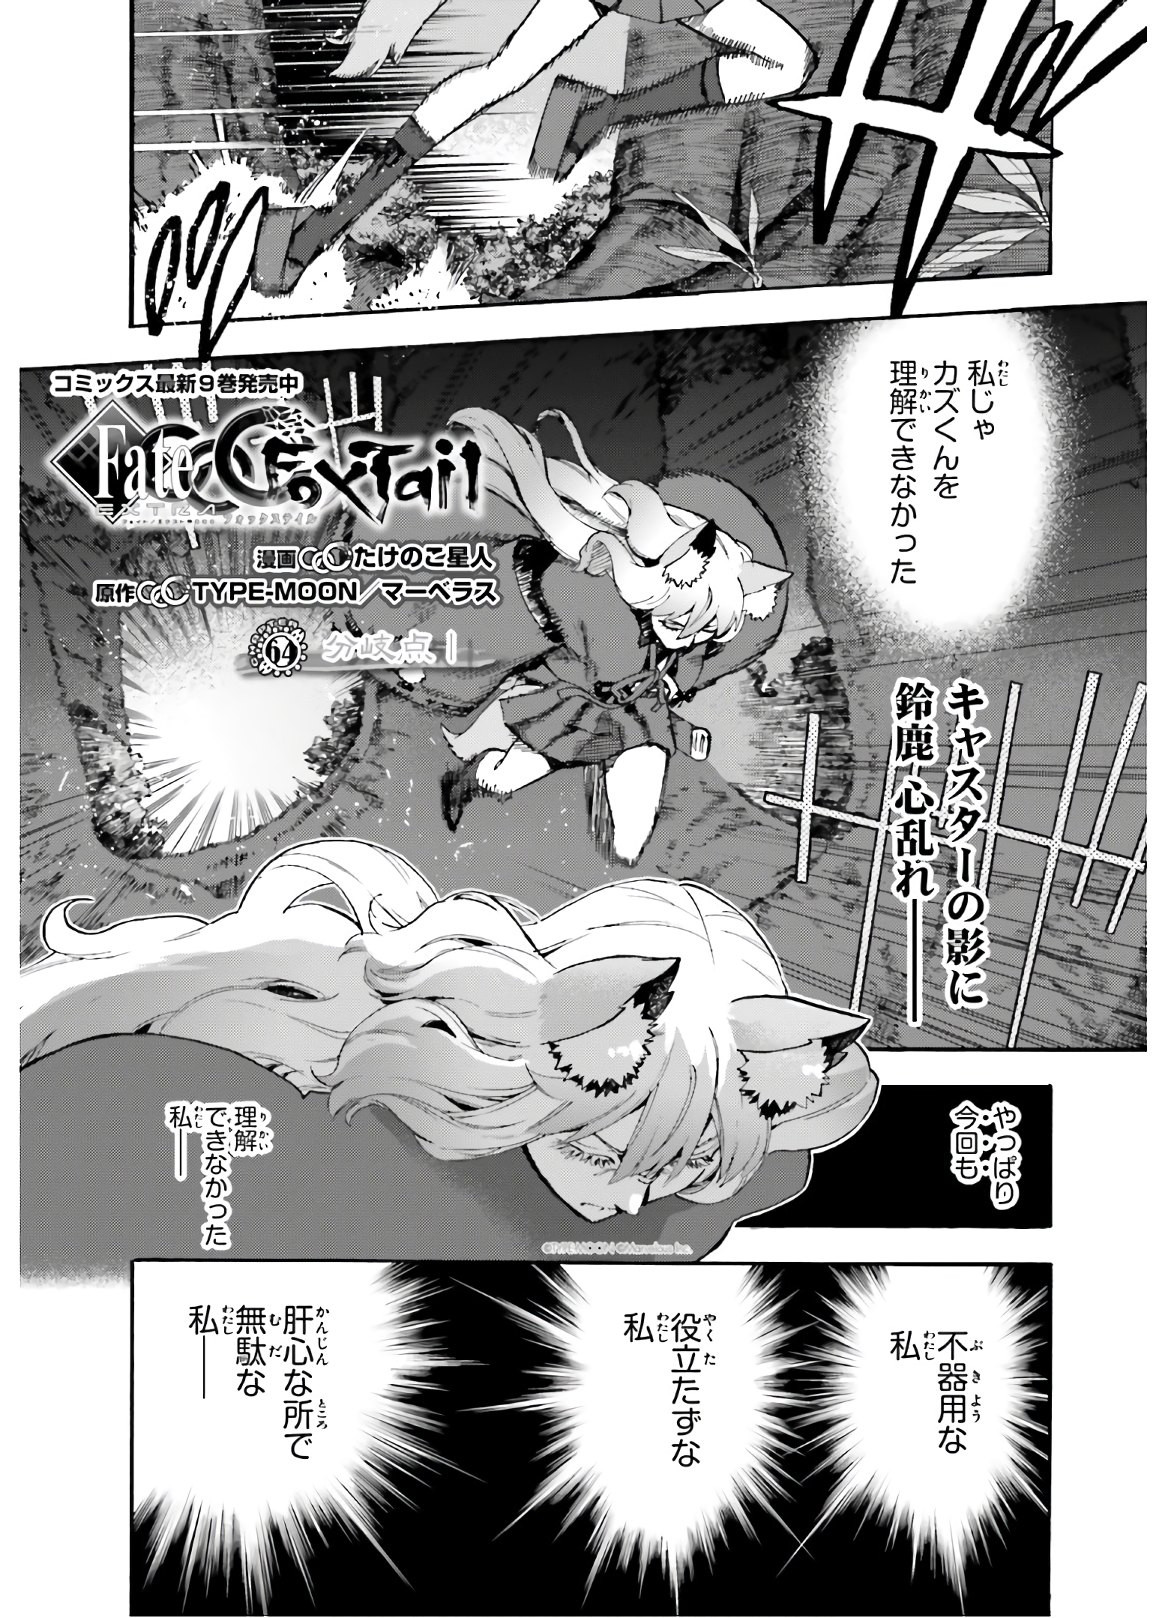 Fate/Extra CCC Fox Tail - Chapter 64 - Page 1